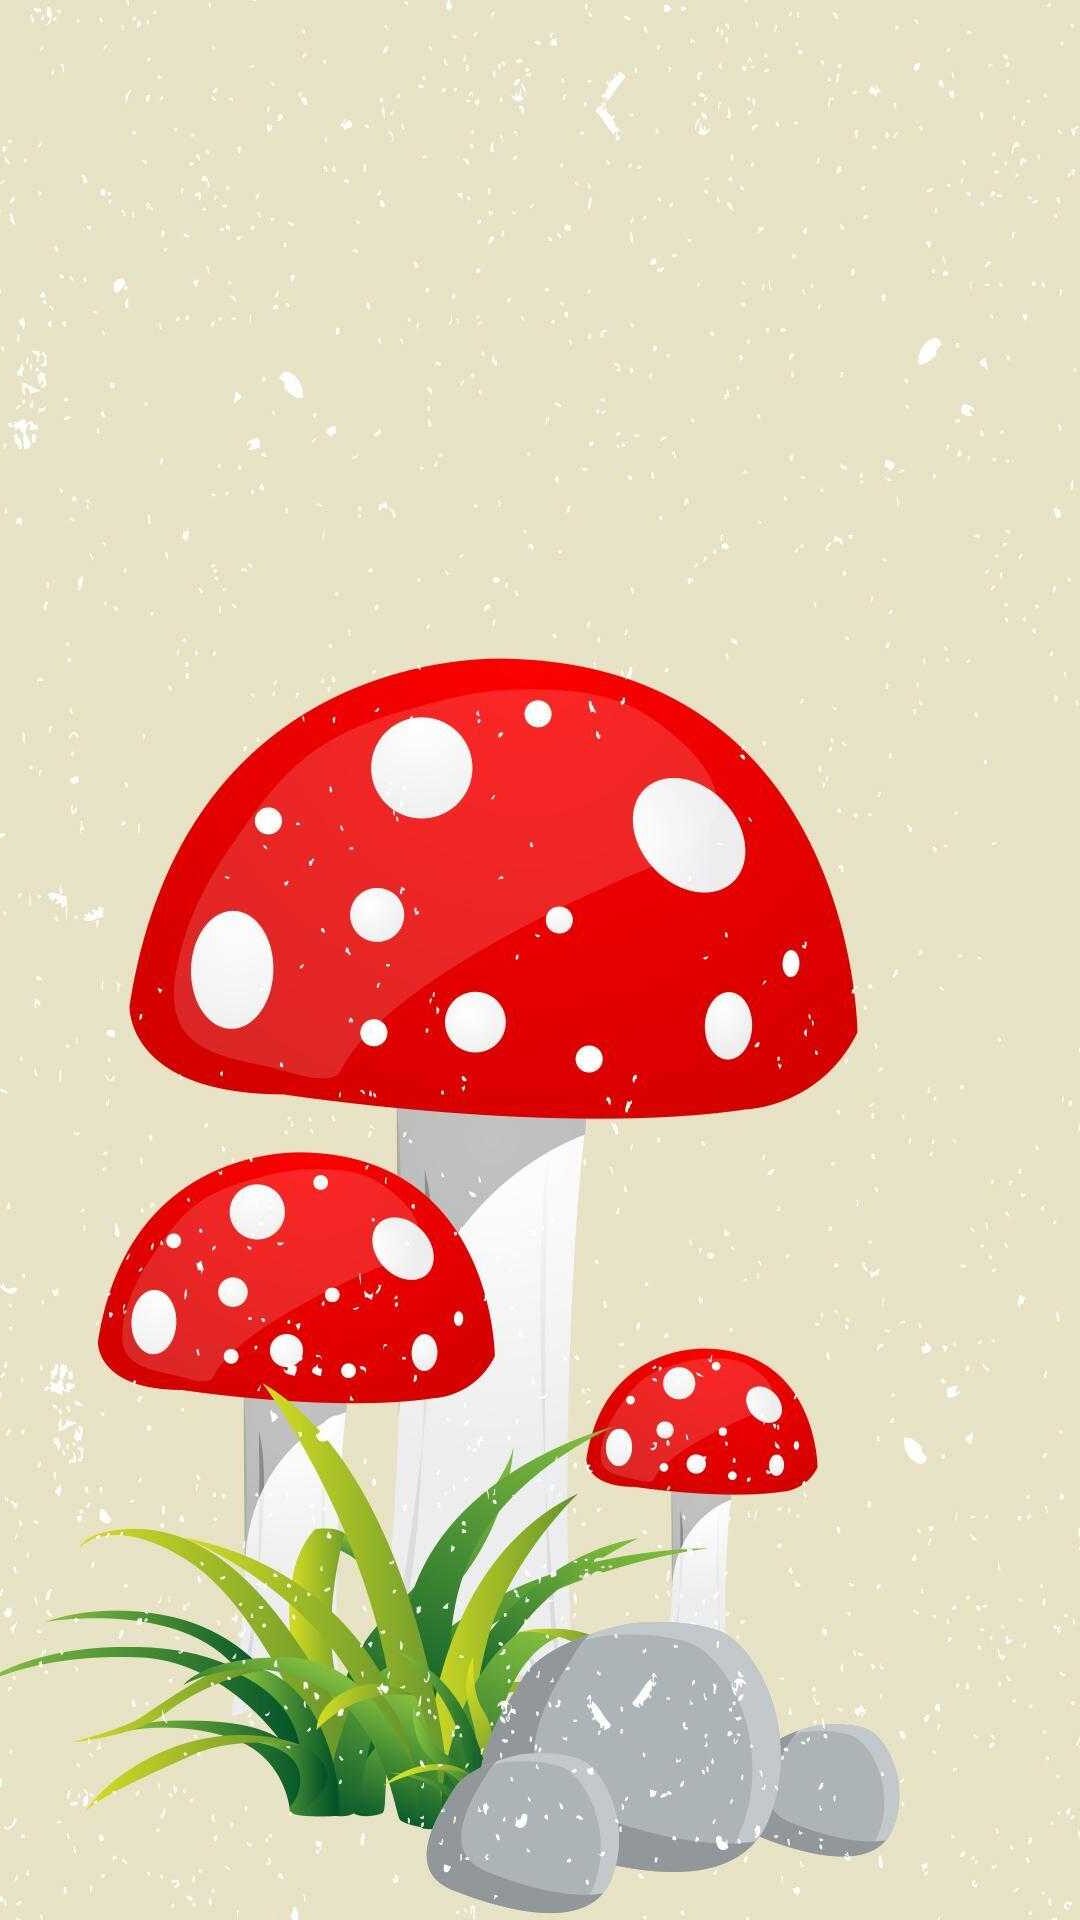 Solve mushroom neon ligth art jigsaw puzzle online with 130 pieces